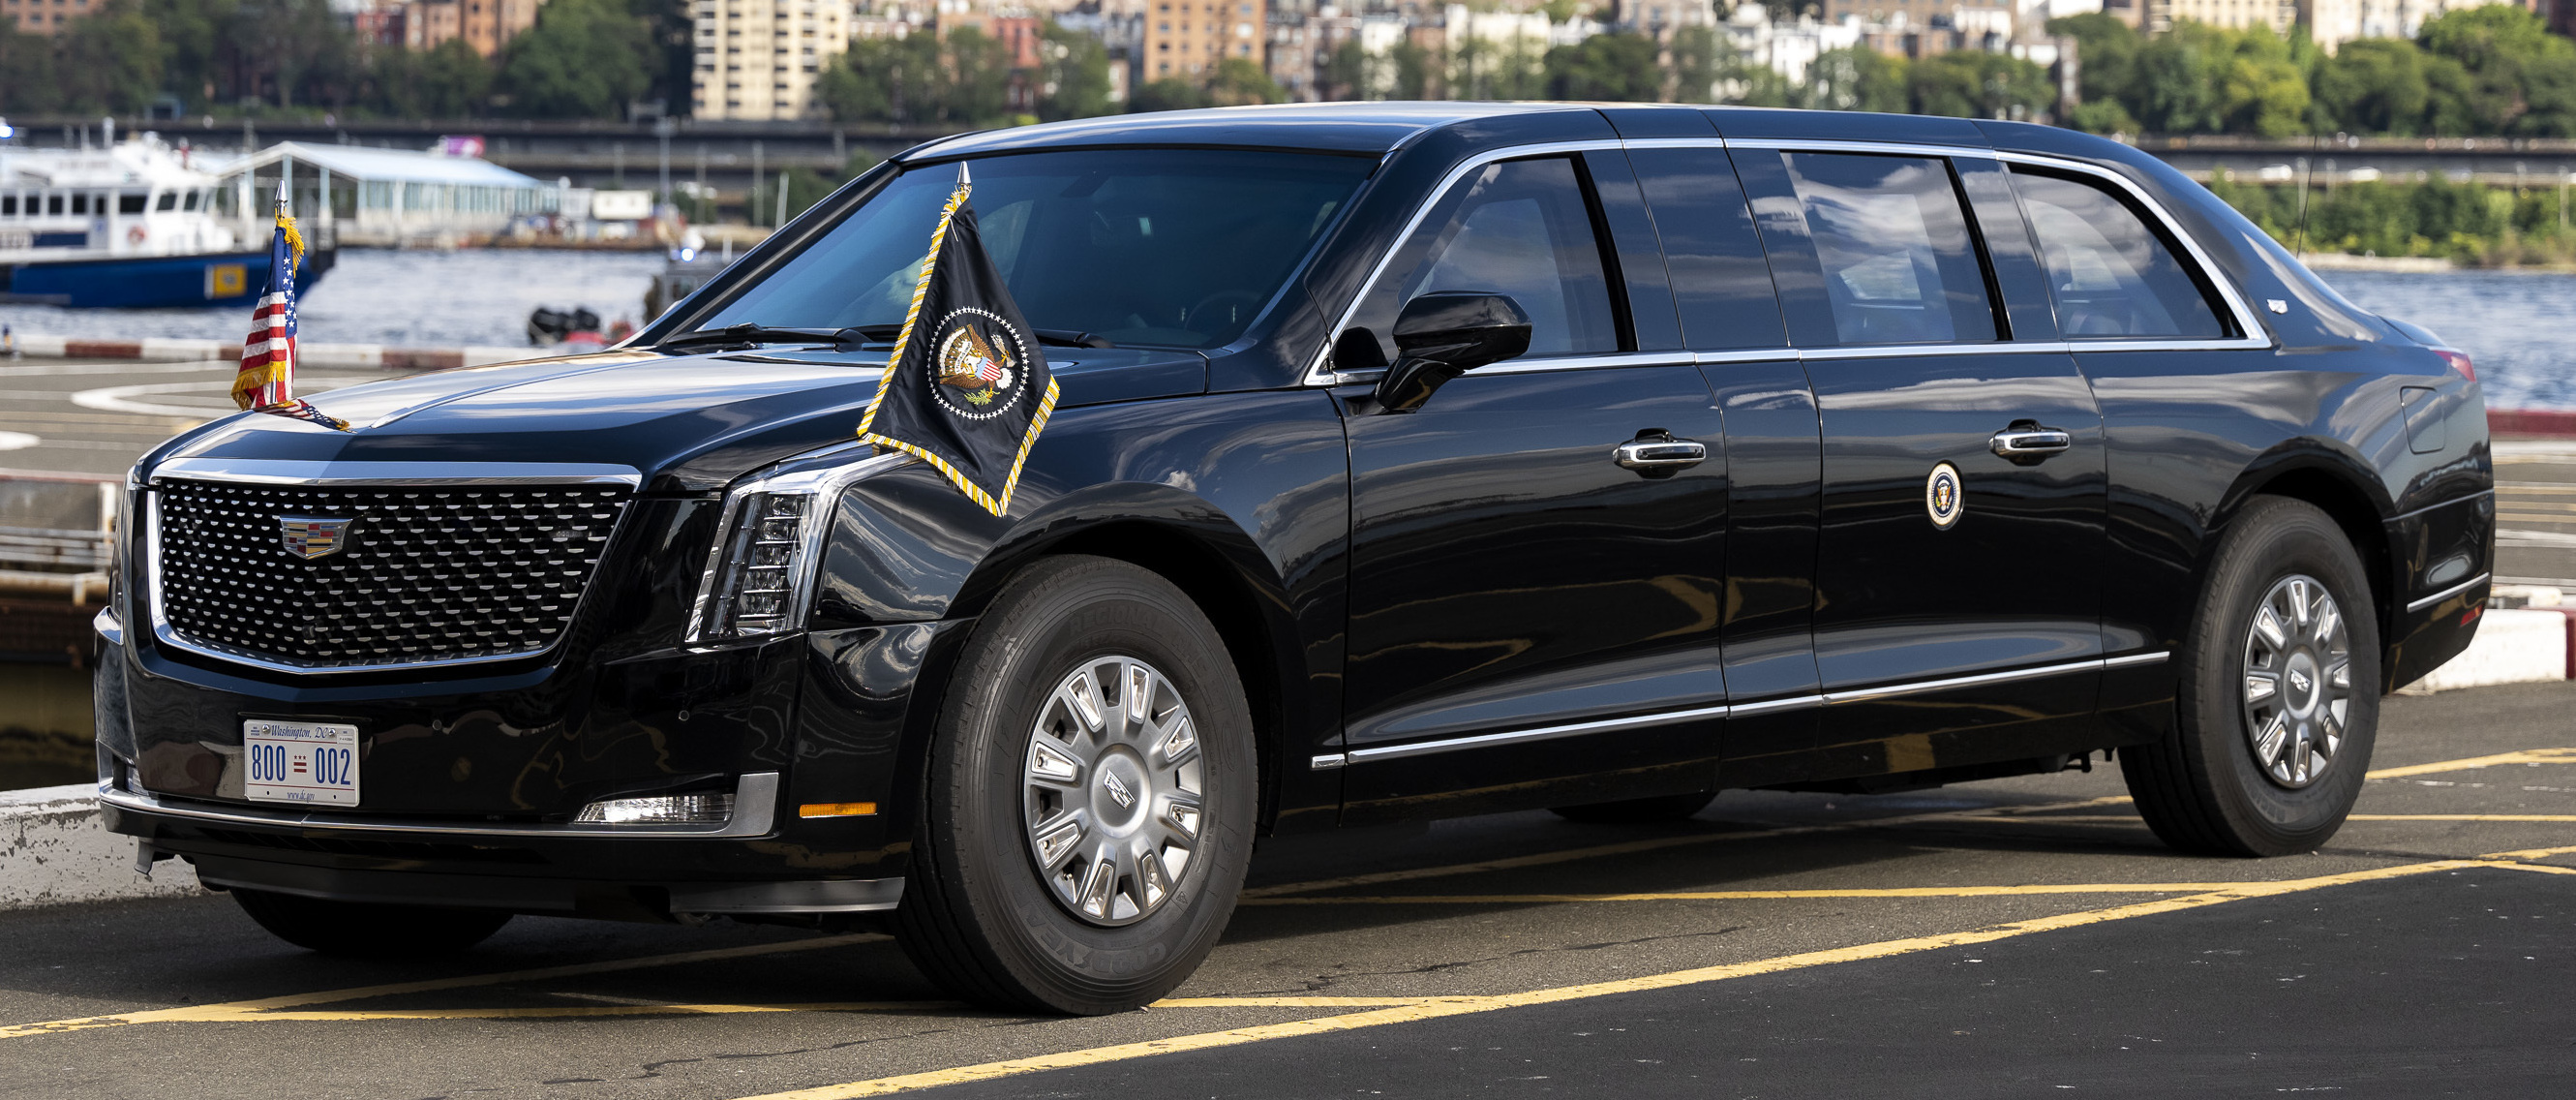 Why is the Presidential Limousine Made by Cadillac?